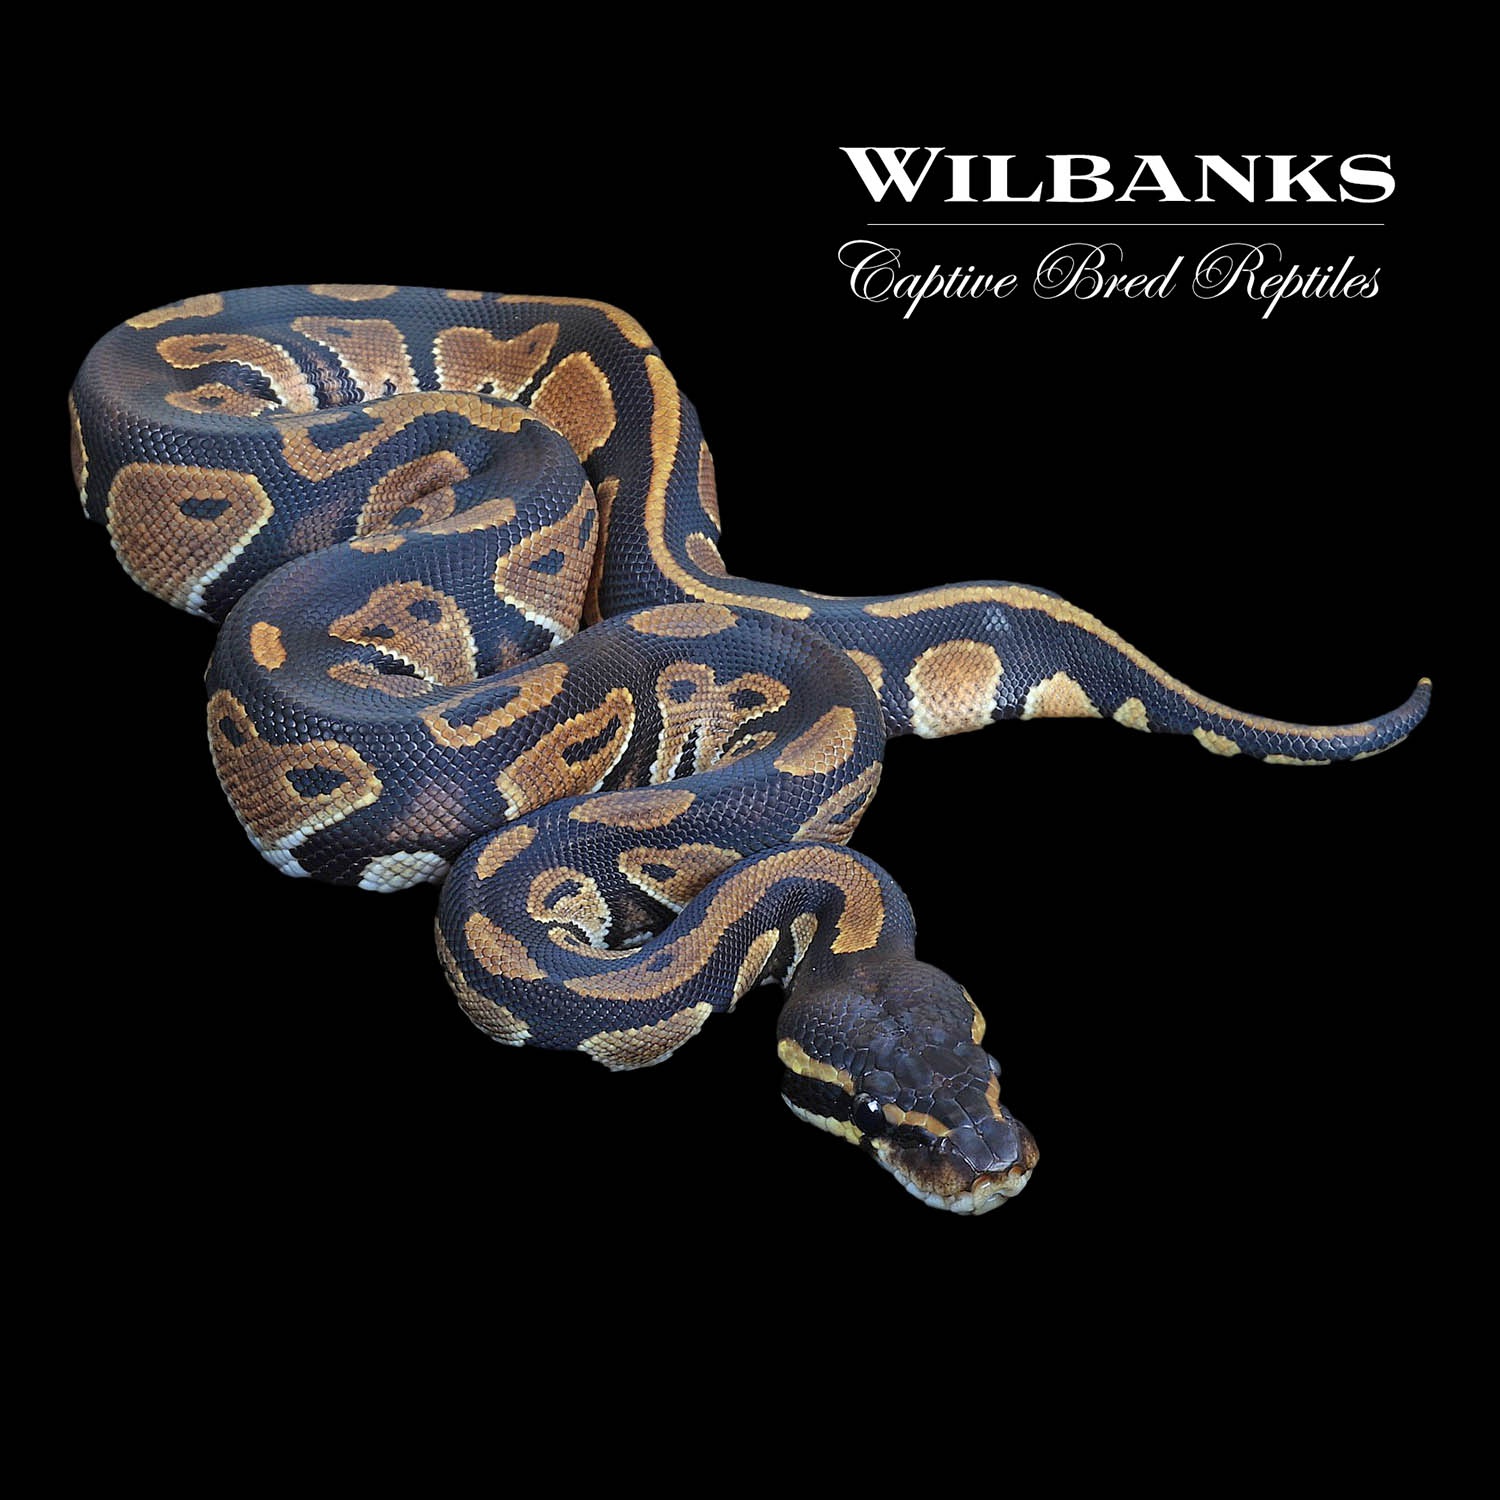 Blackhead Ball Python by Wilbanks Captive Bred Reptiles